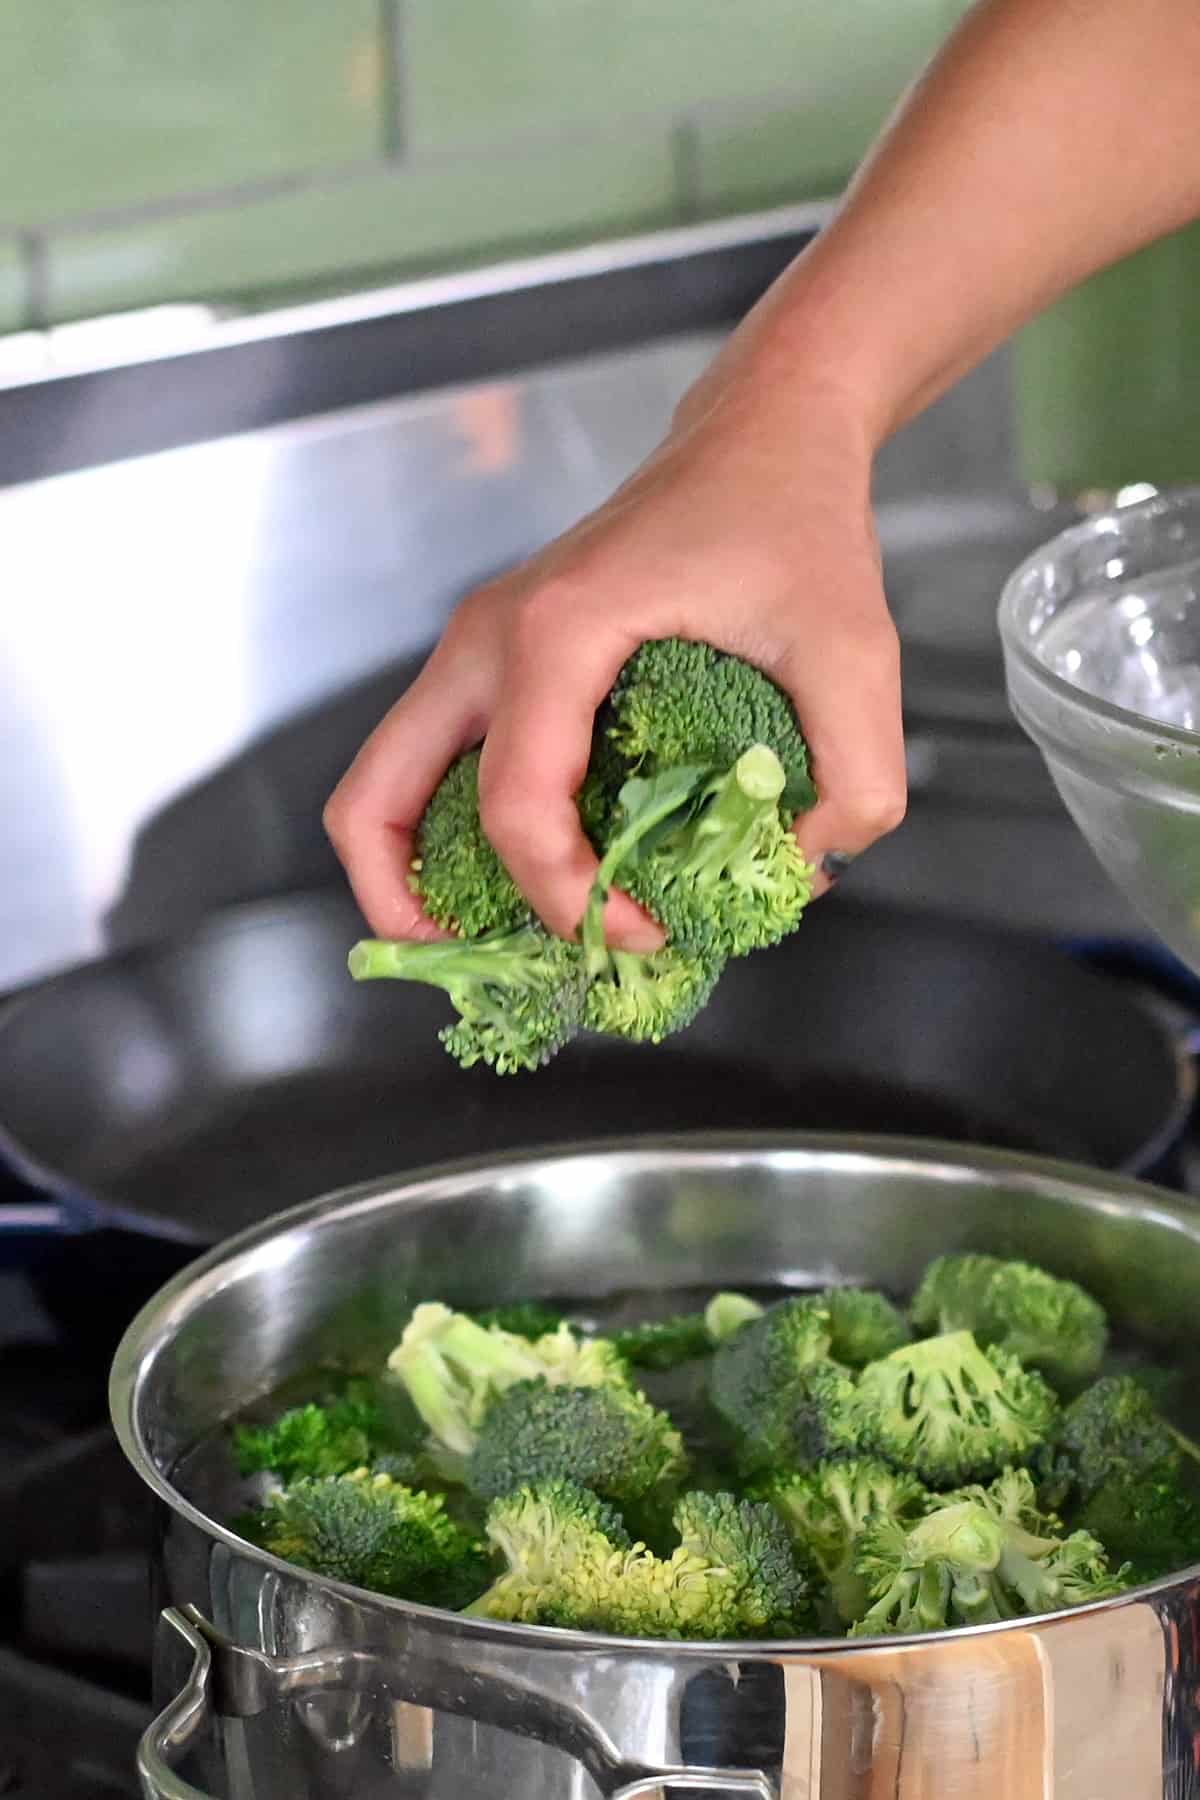 A hand is adding broccoli florets to an open pot of boiling water.